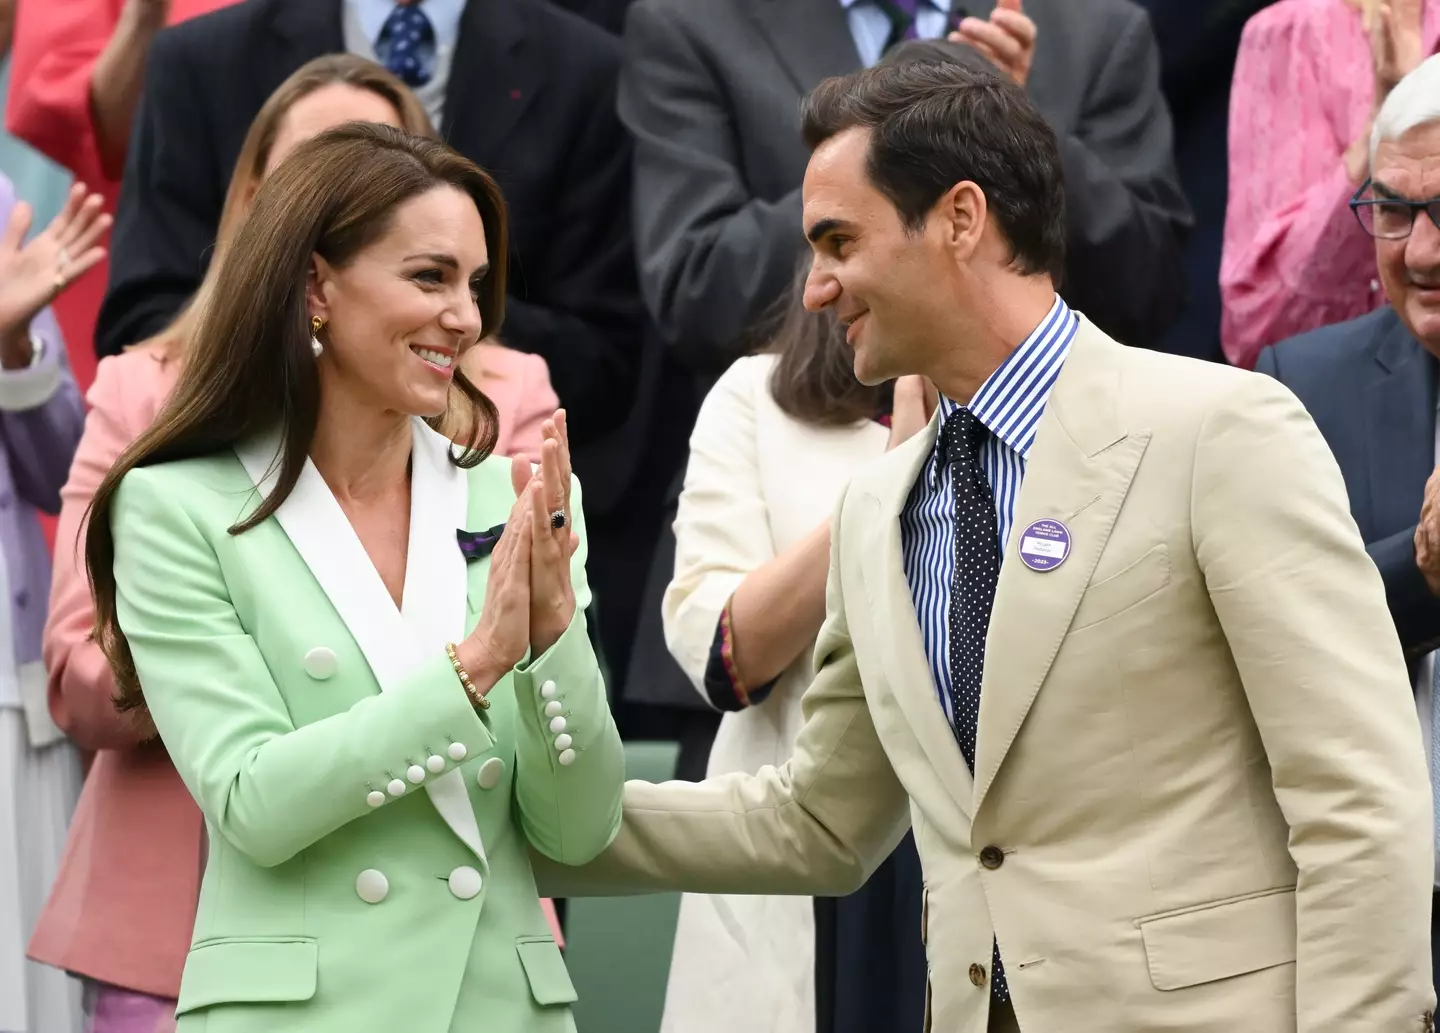 Roger Federer meets with Kate Middleton. (Karwai Tang/WireImage)